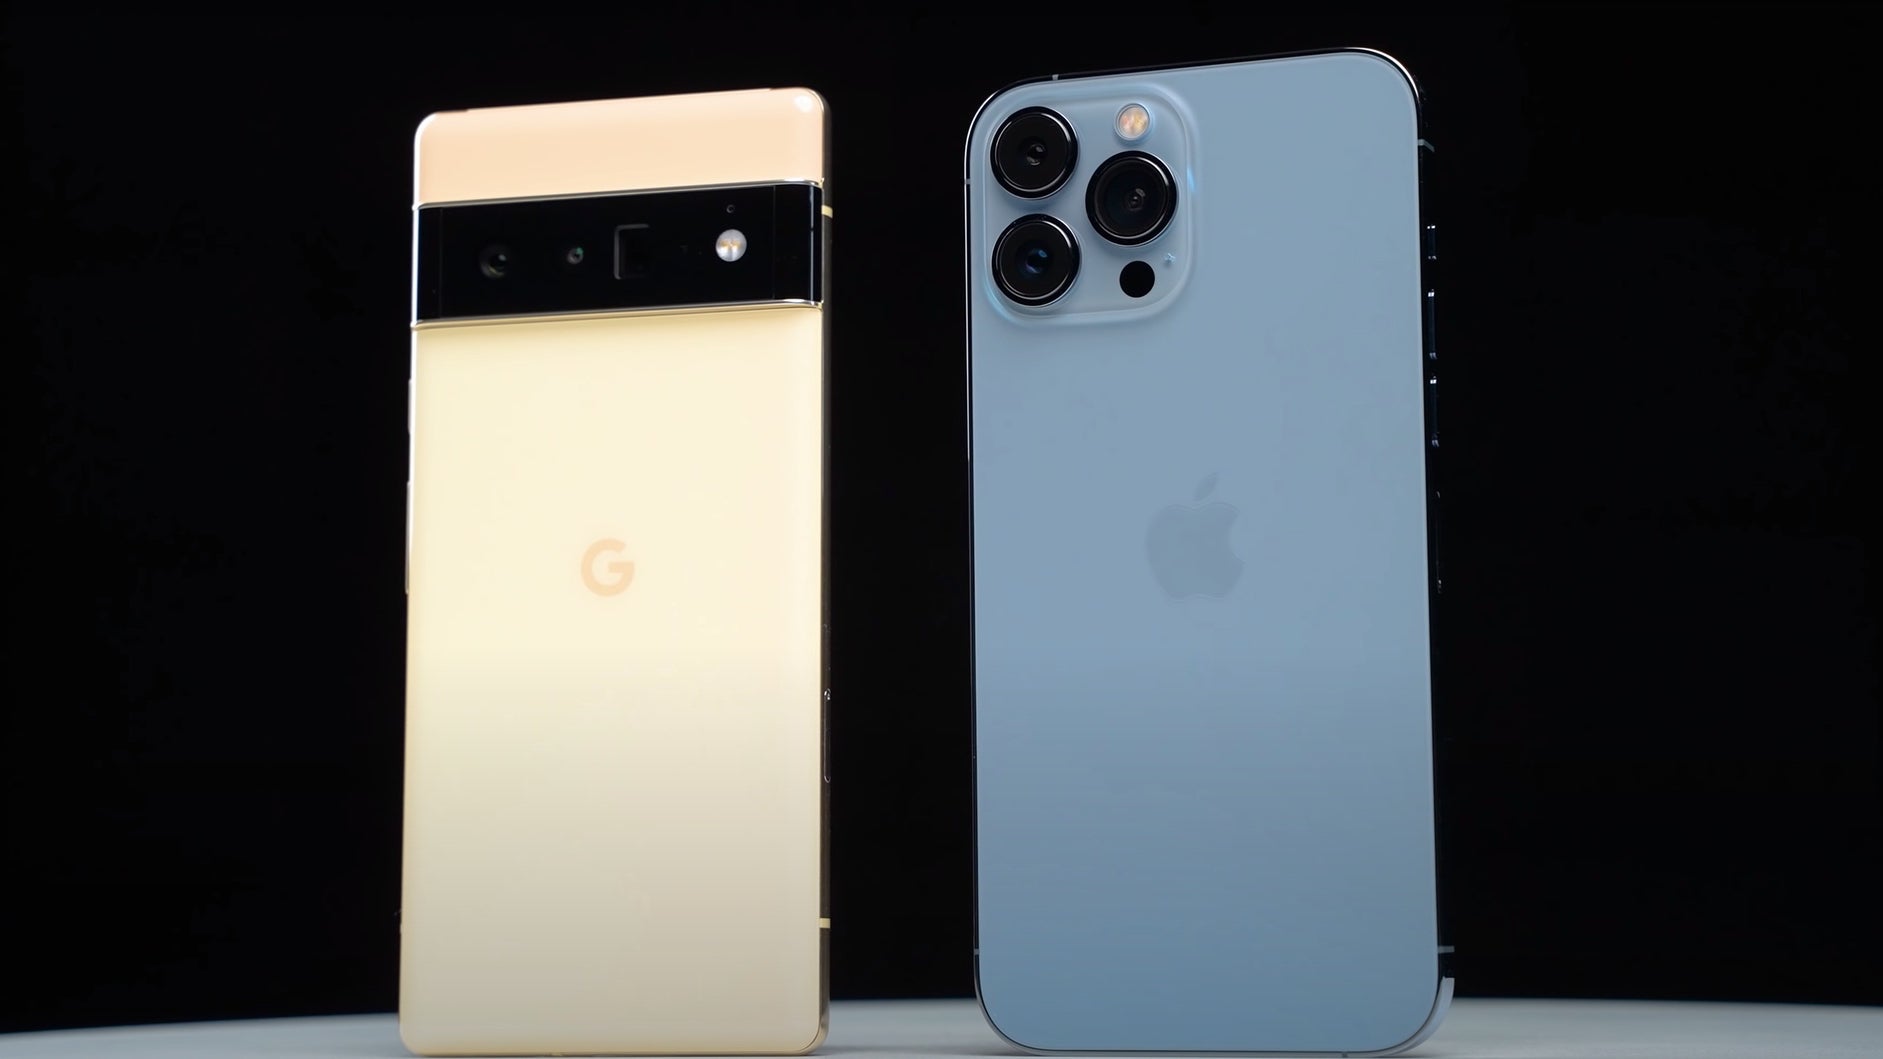 Who needs a mid-range phone when you can get a premium flagship with all the extra features in the world? - Unbelievable! $200 Pixel 6 and $300 Pixel 6 Pro: Google kills Samsung, Apple in old flagship race